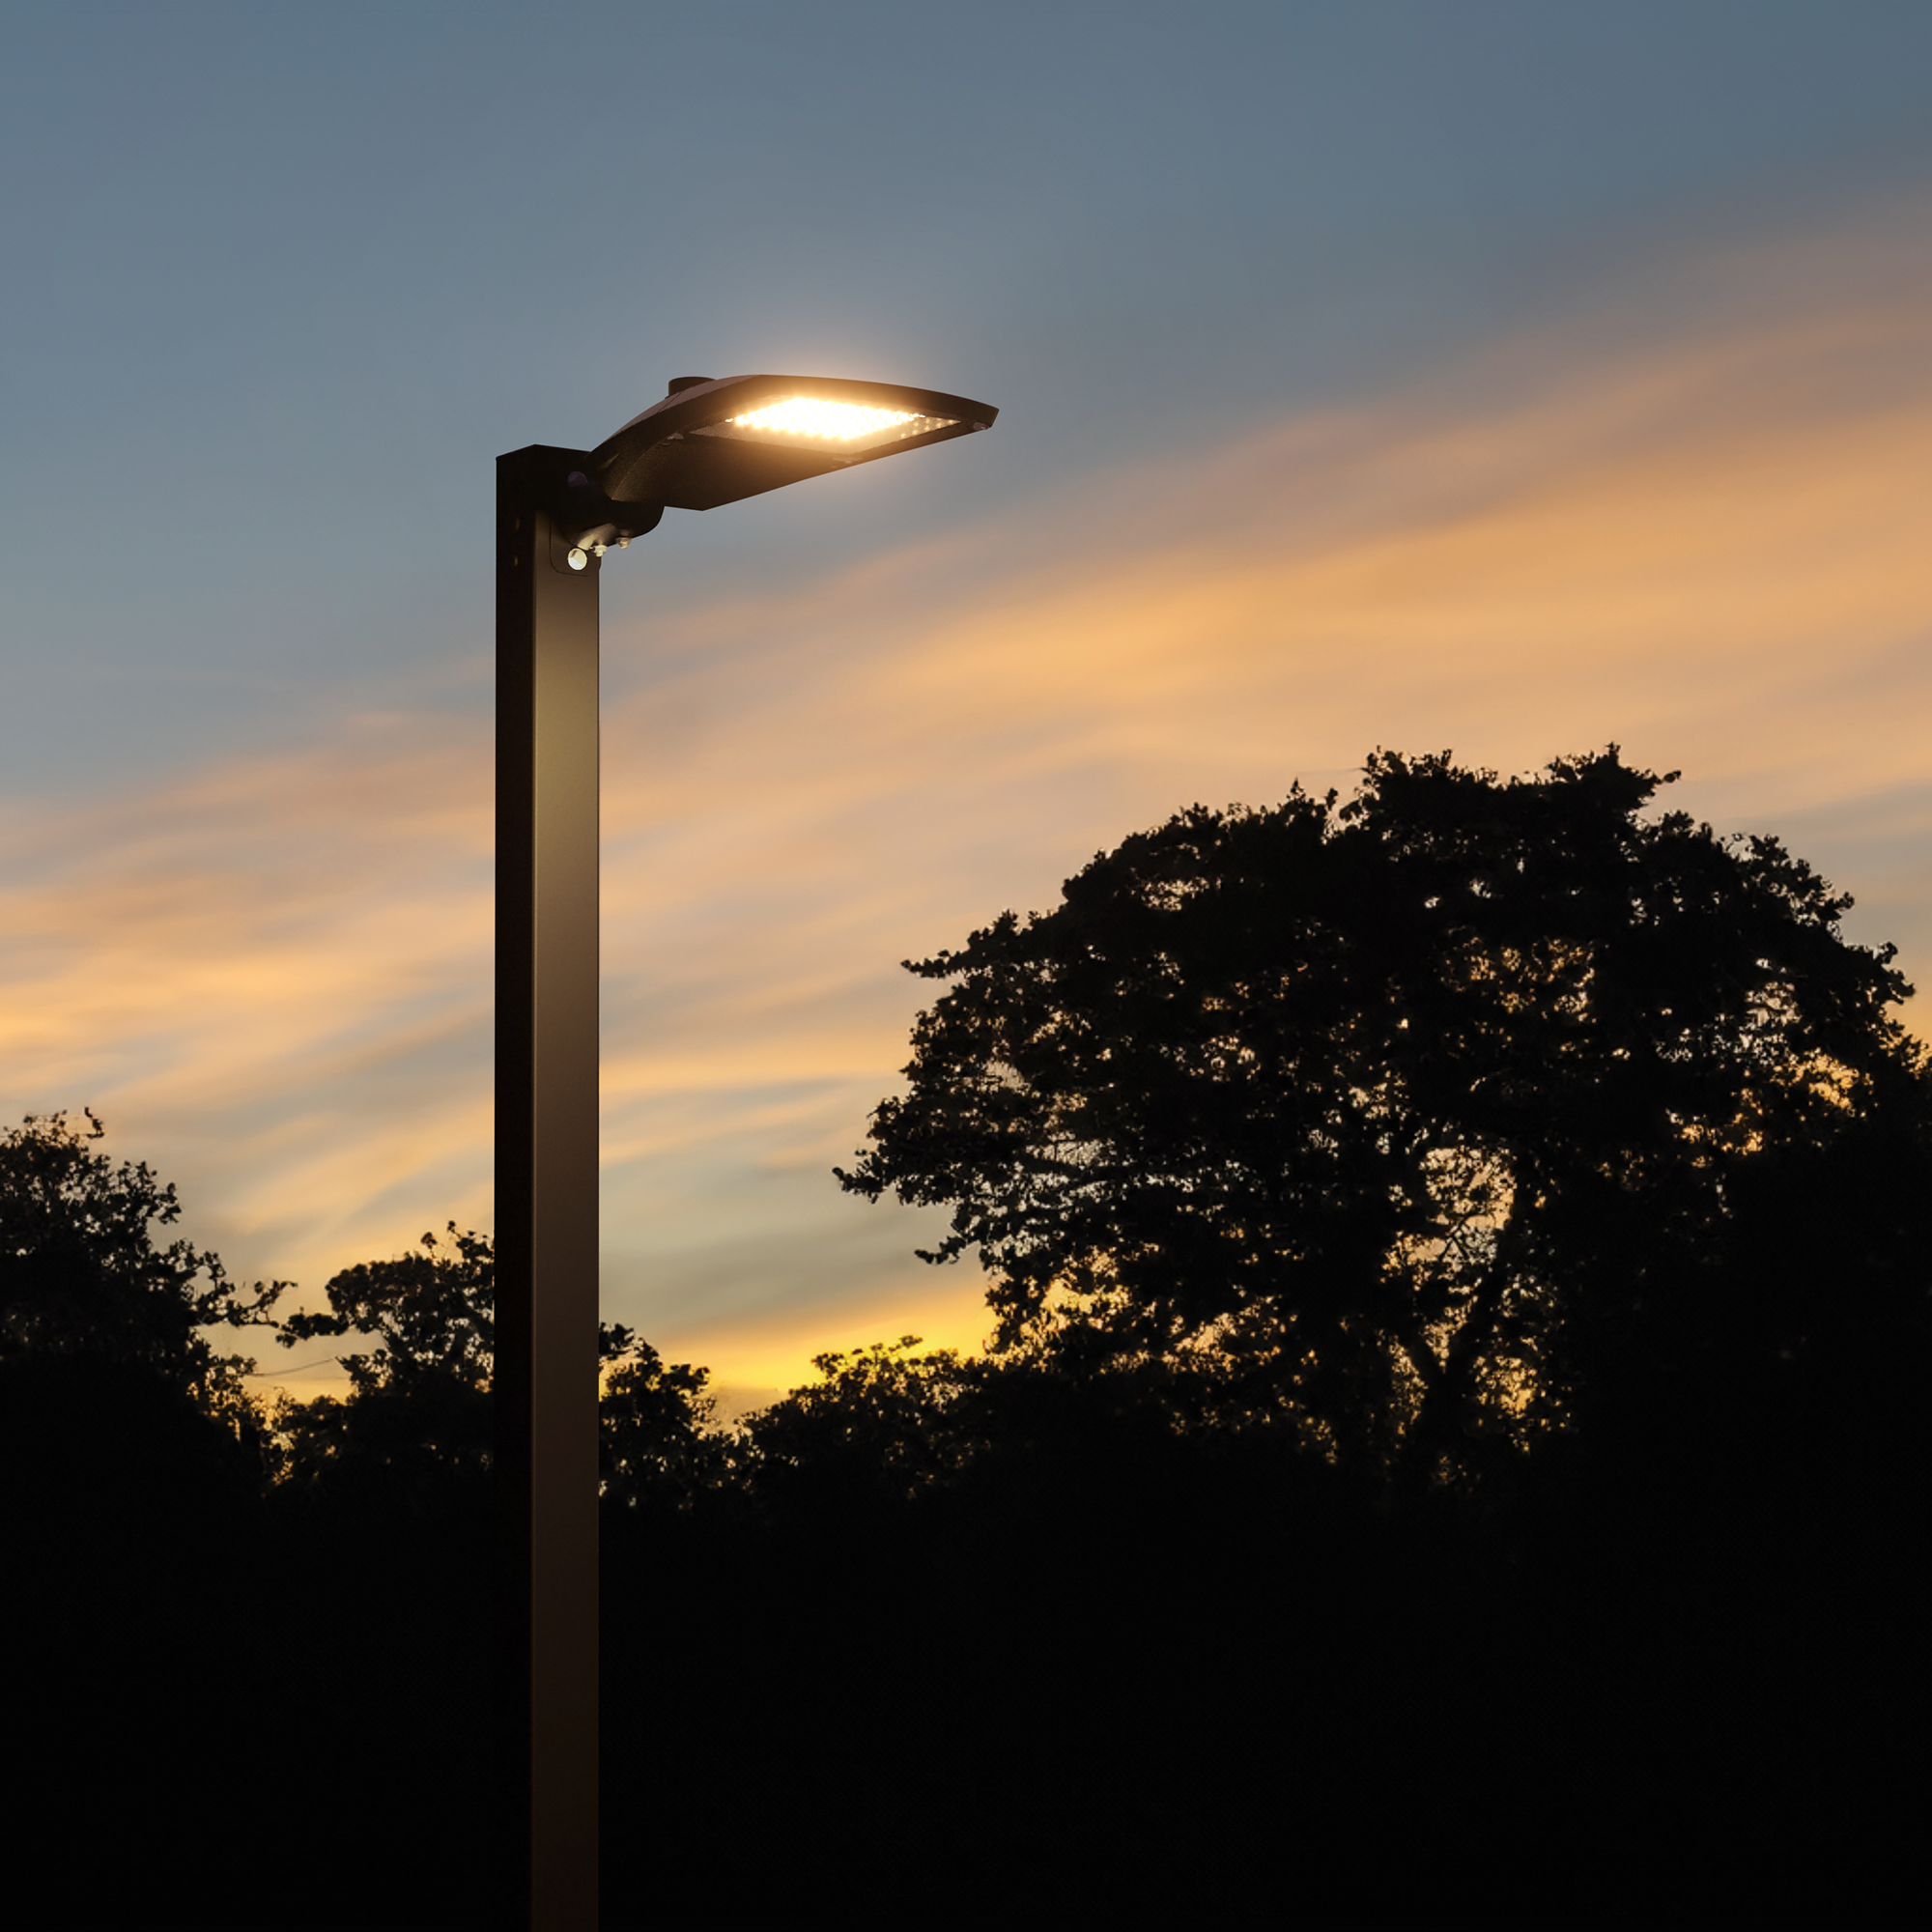 The Reefton at night has clean lines and subtle profile result in an elegant, modern luminaire suitable for a wide range of urban and infrastructure environments.